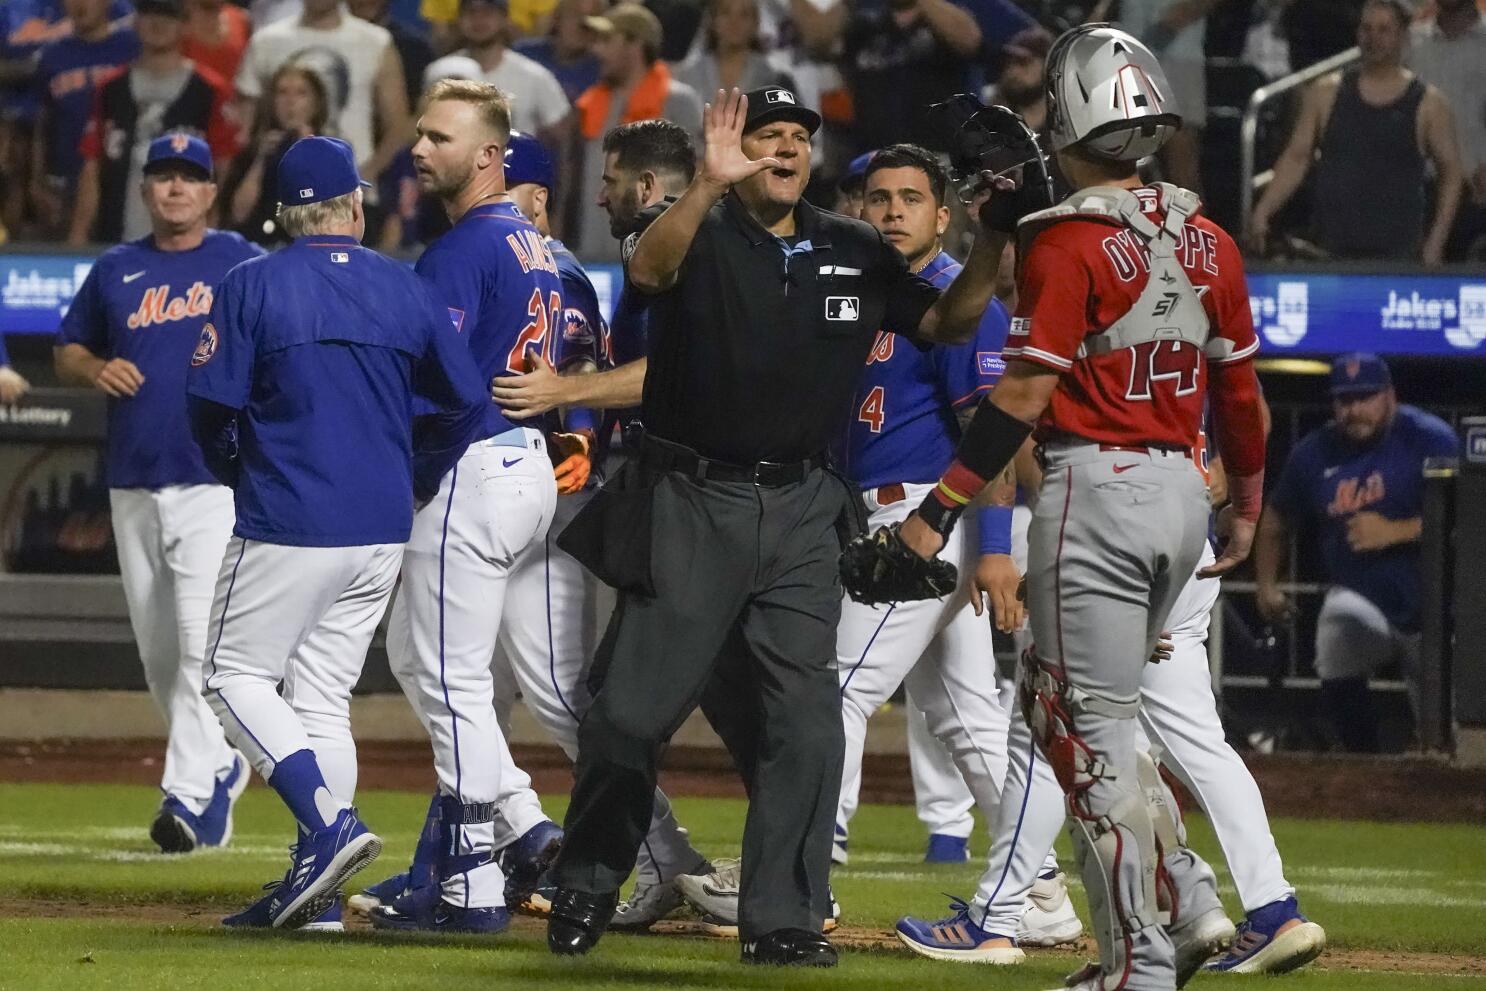 Pete Alonso's Injury Highlights Risk of Hit-by-Pitch as Strategy